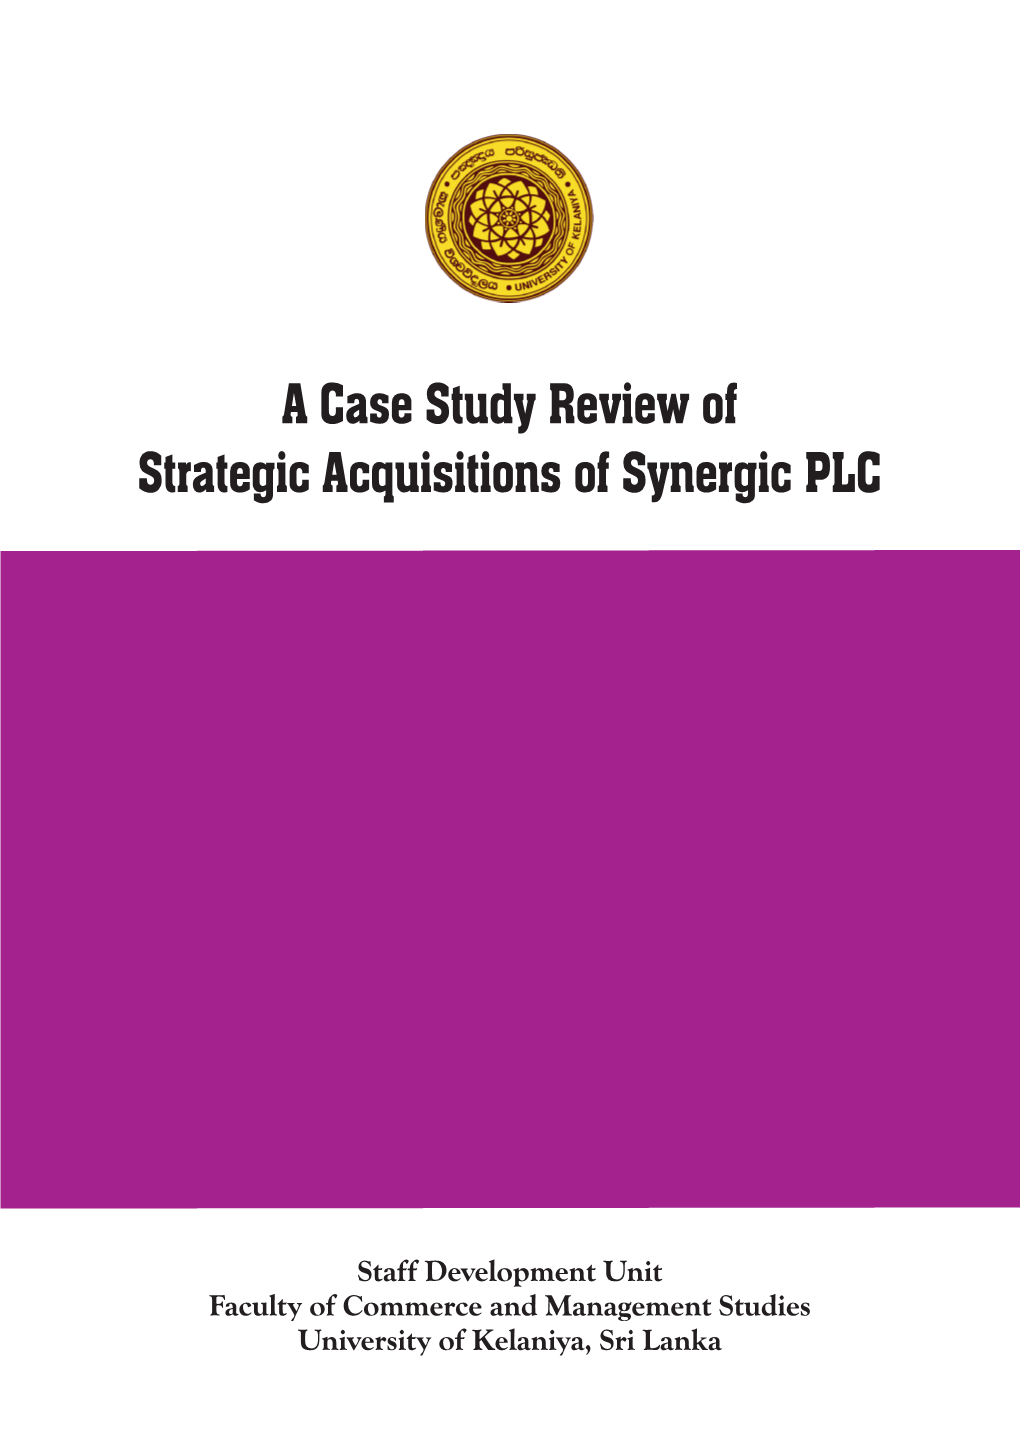 A Case Study Review of Strategic Acquisitions of Synergic PLC